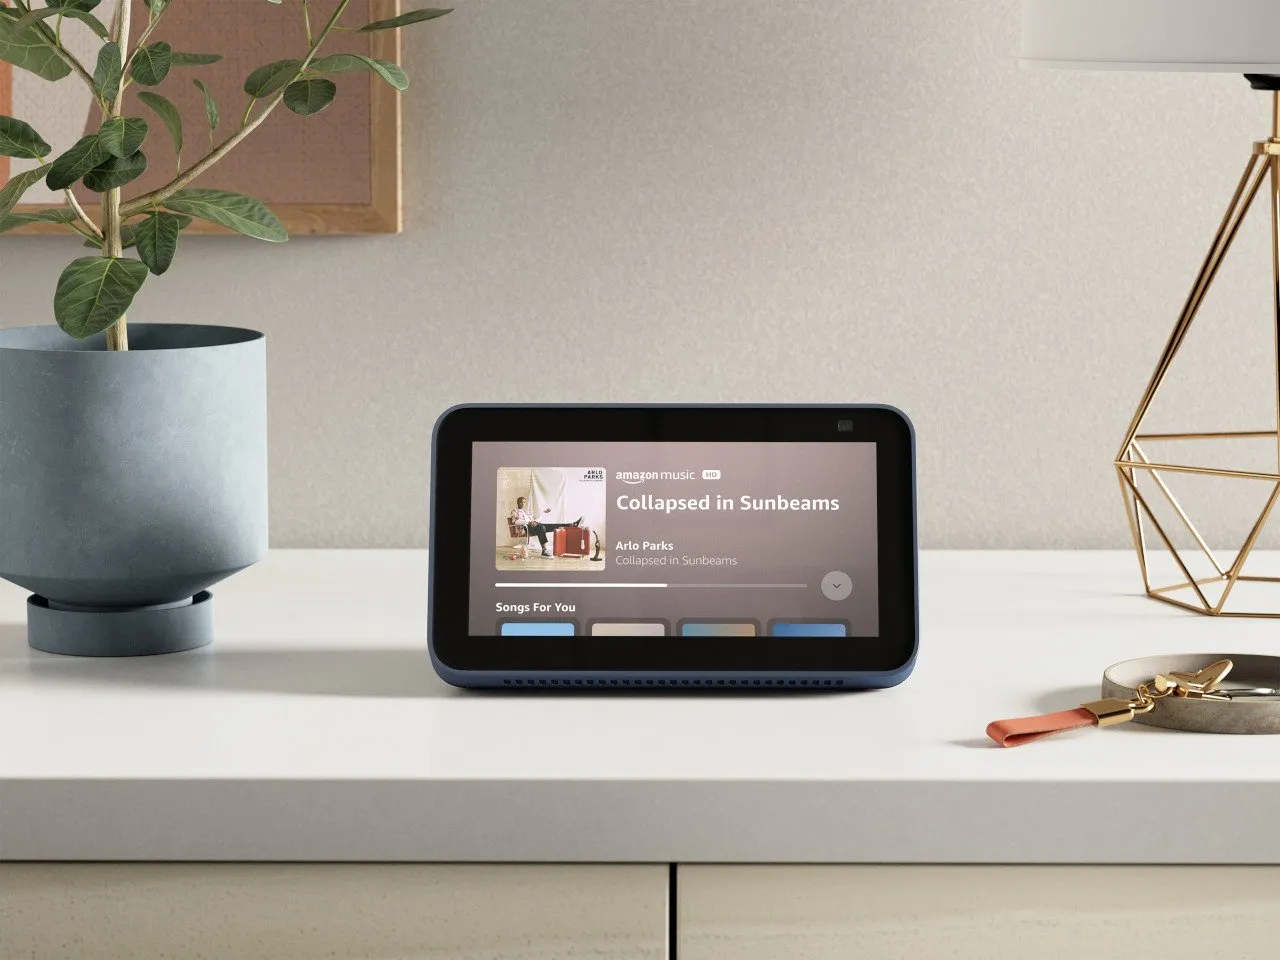 How To Download Apps On Echo Show